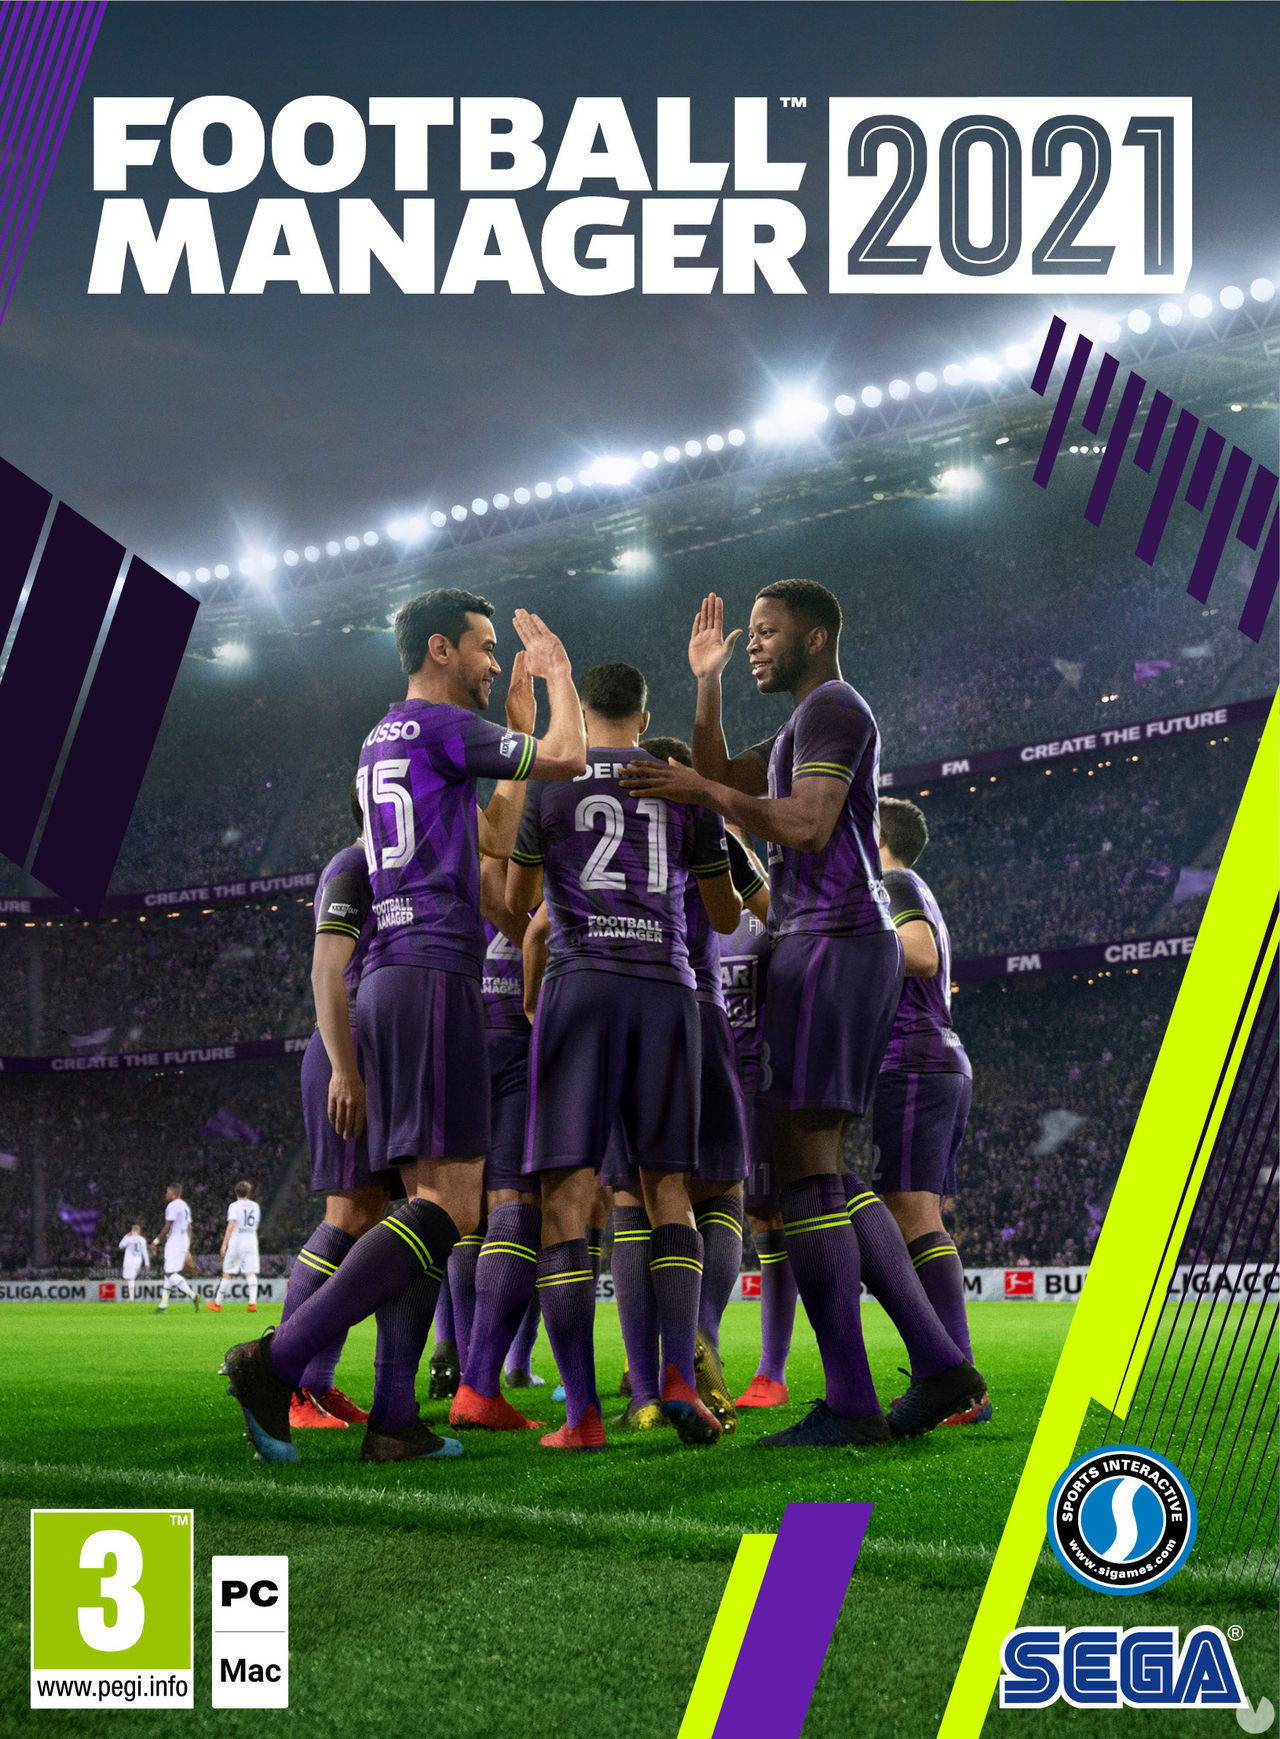 football manager 2021 xbox one price